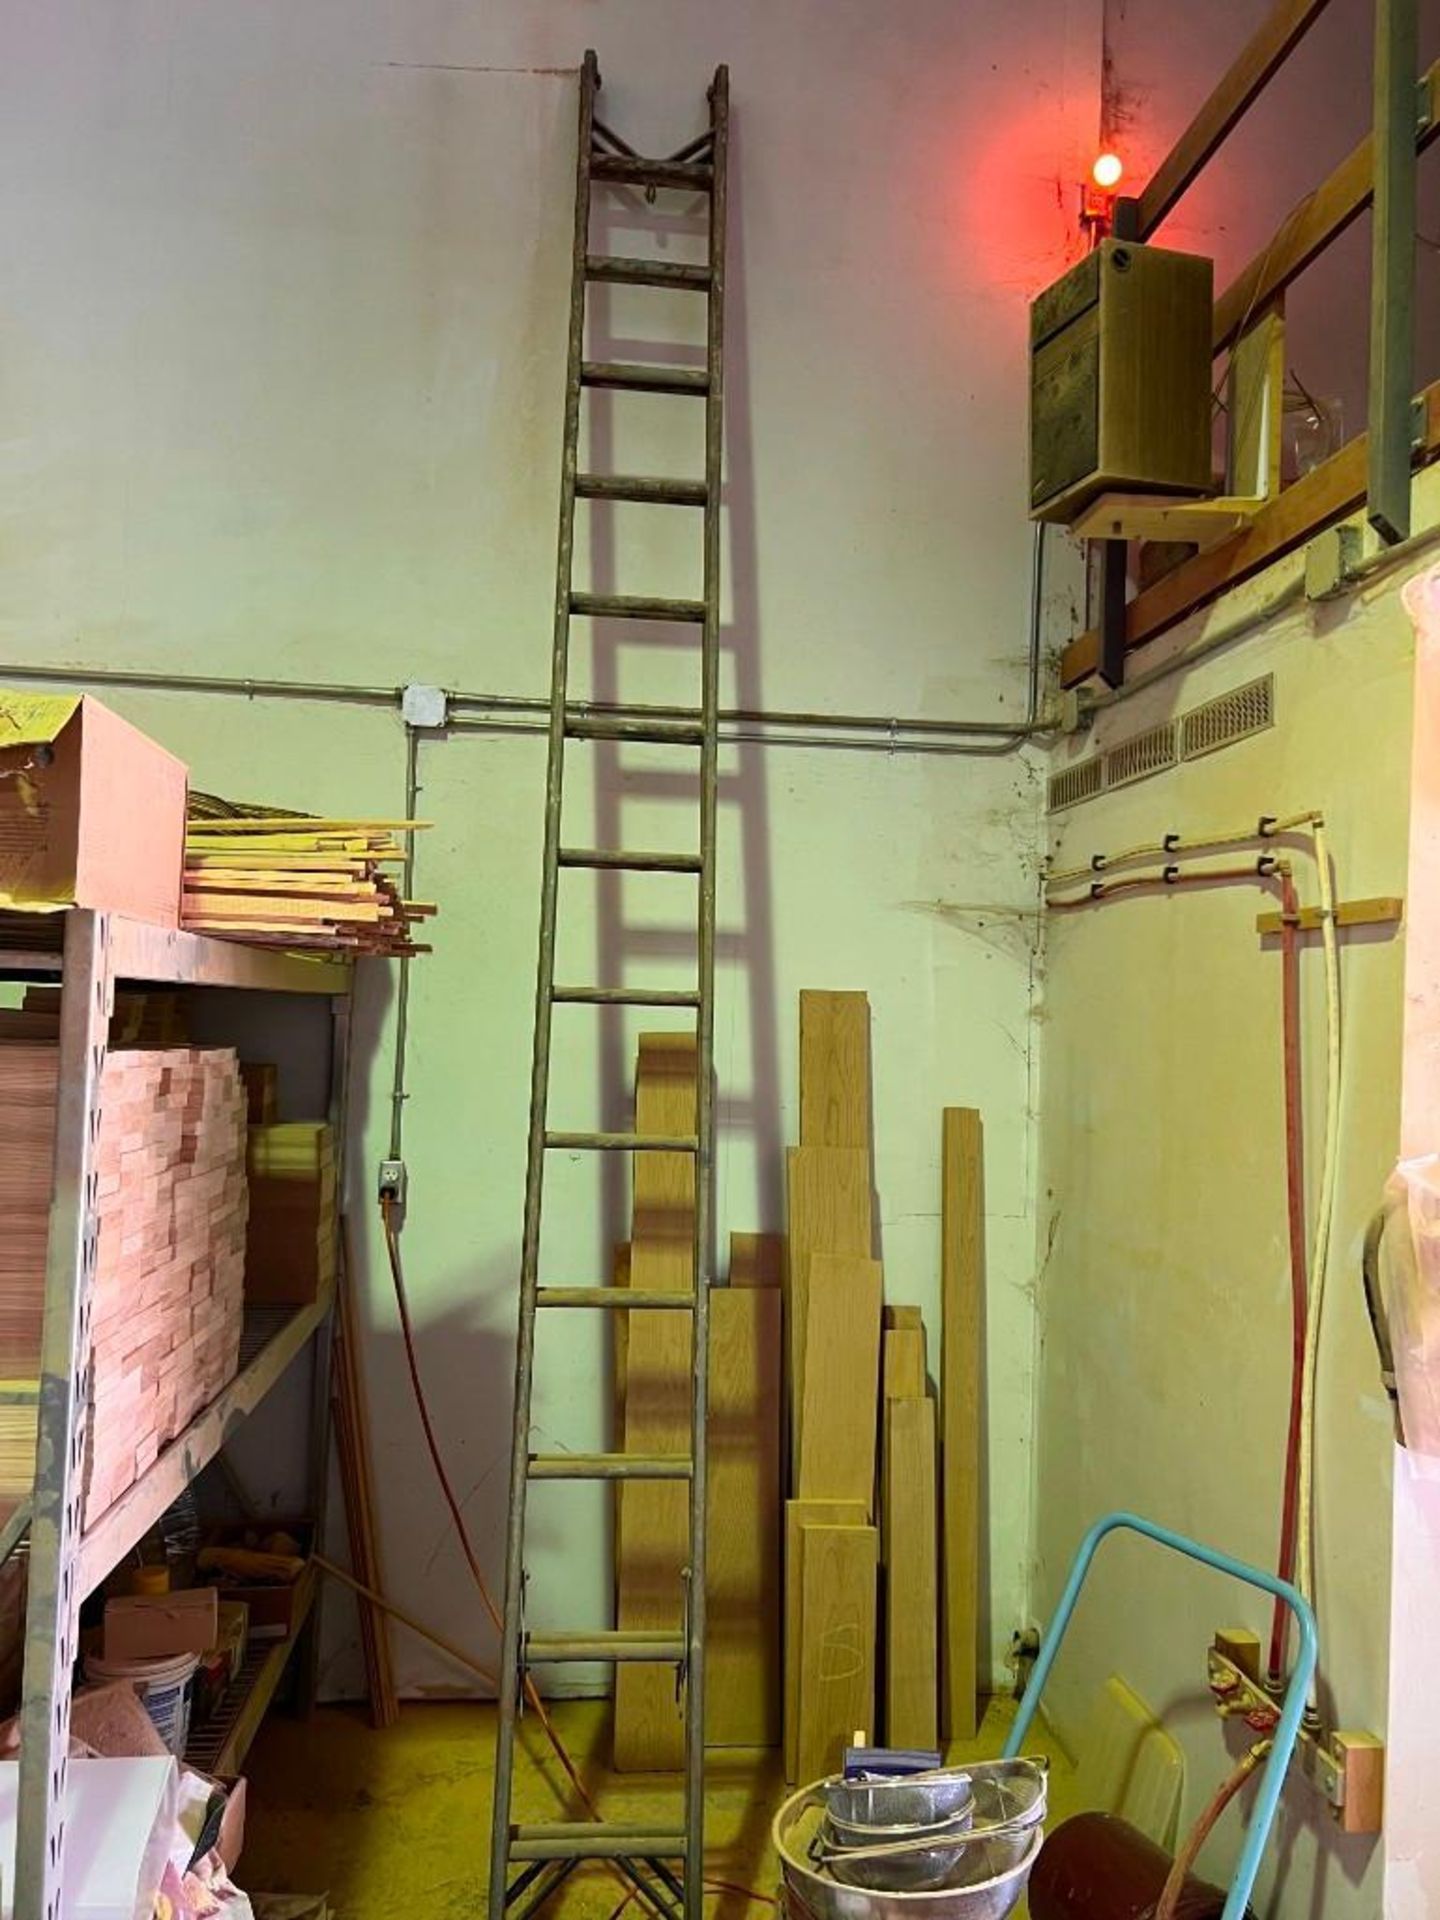 All ladders - Image 2 of 4